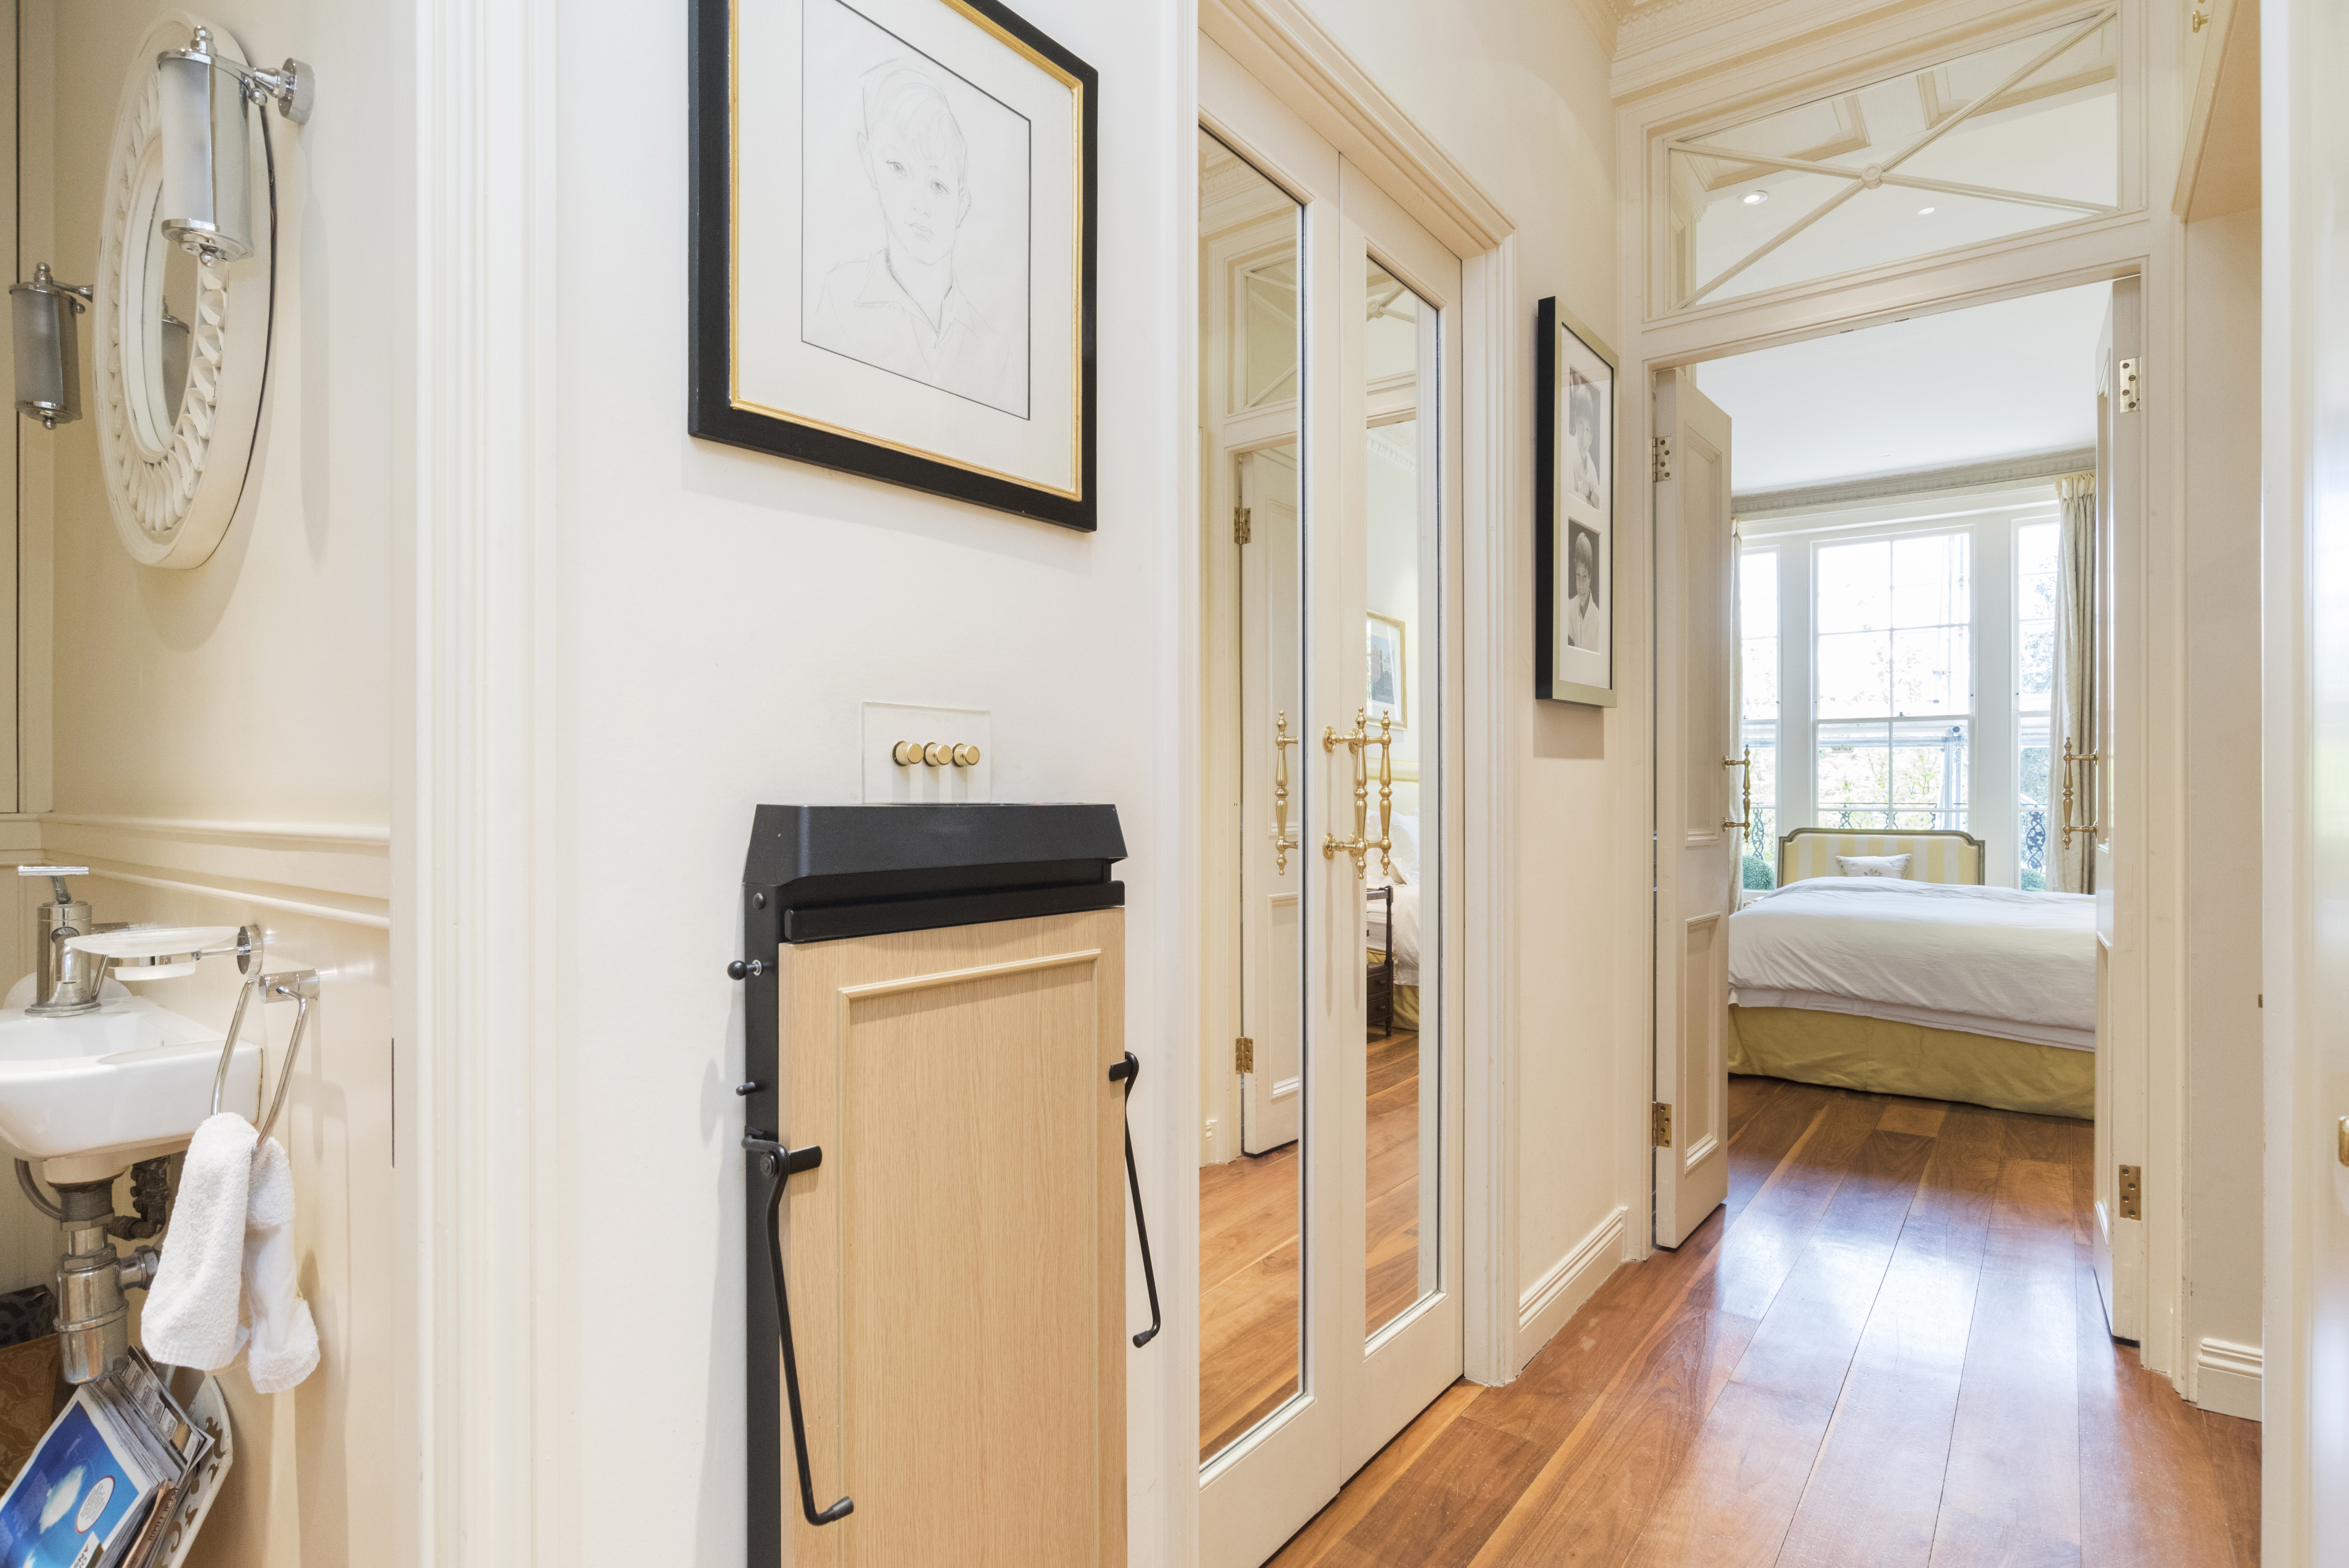 Lovelydays Luxury Rentals introduce you pictures of a huge charming house in Kensington, London.